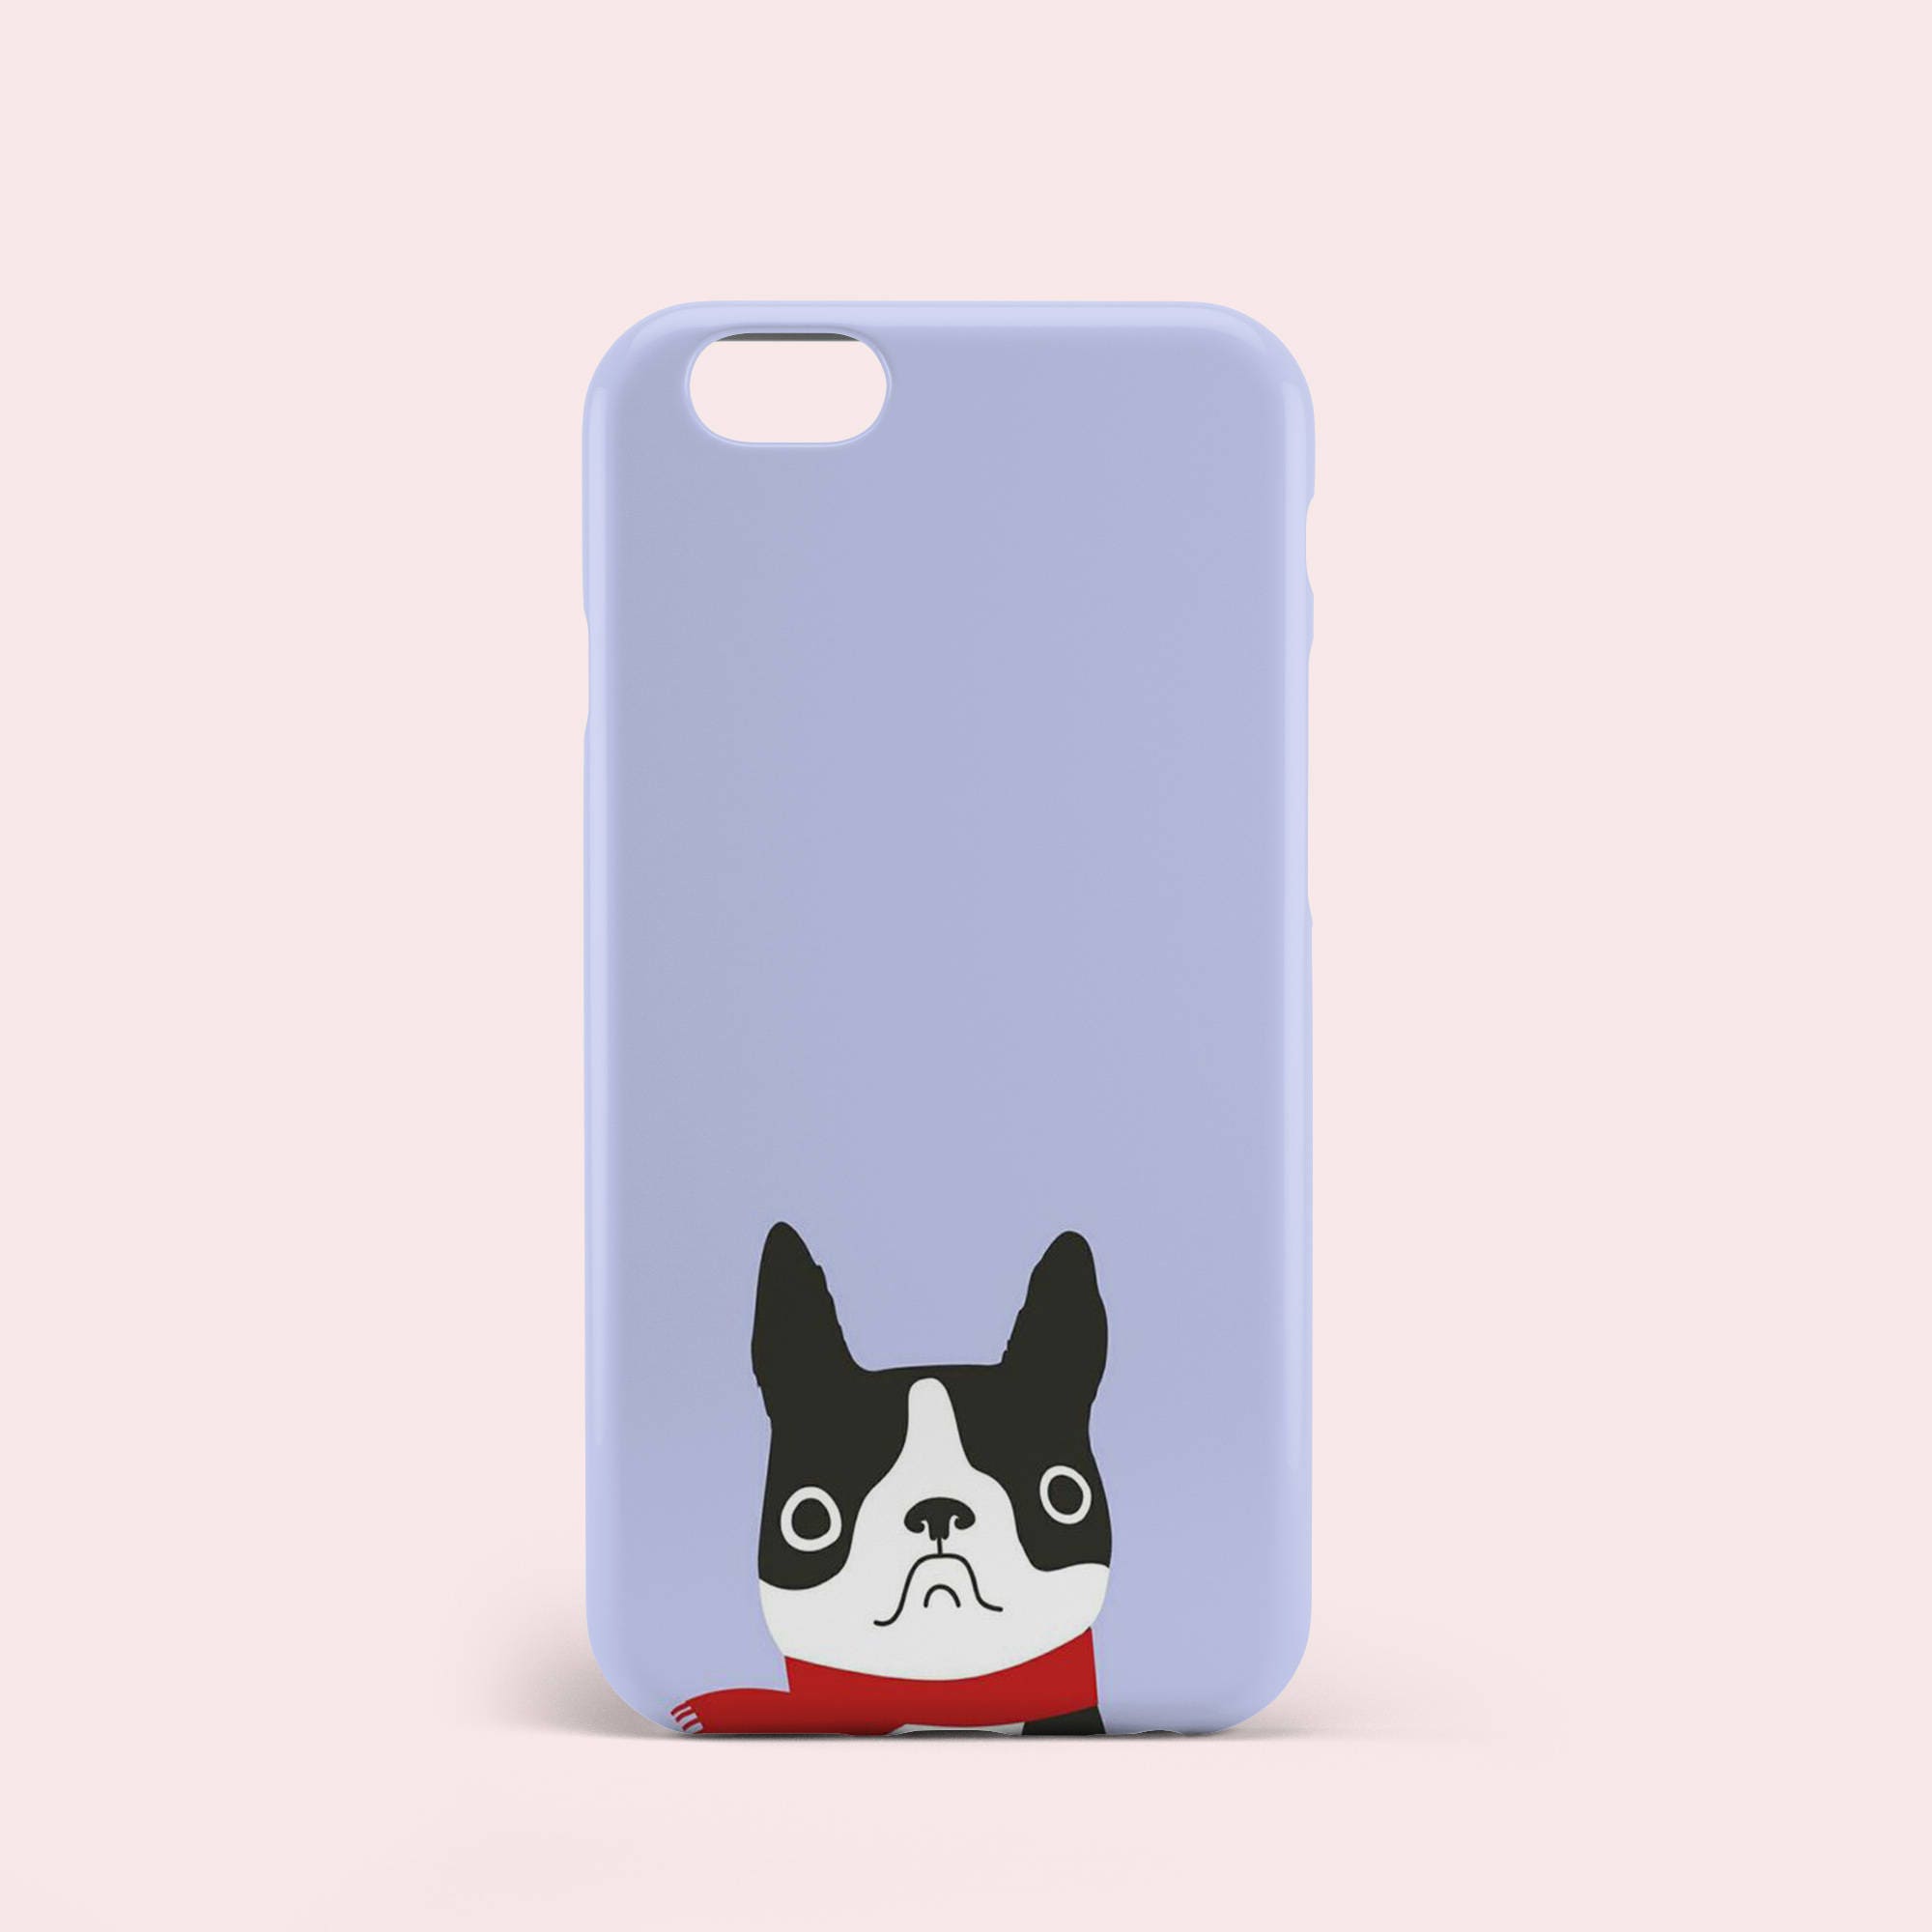 Cute Dog Design iPhone 6 Case Girly Phone case Gift for her